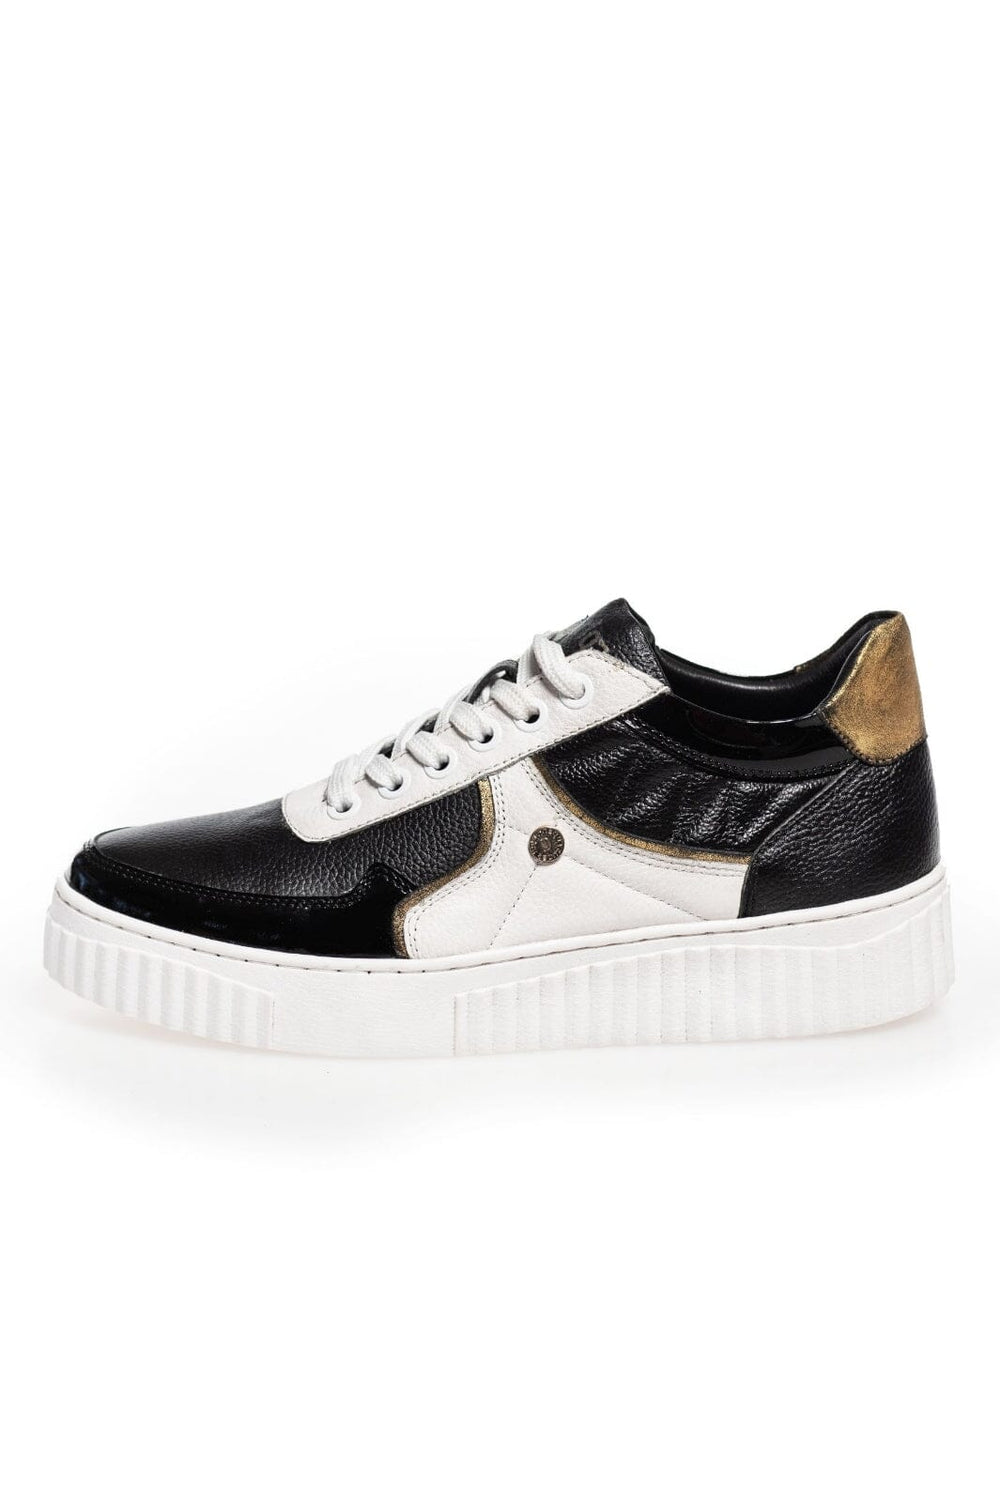 Copenhagen Shoes - Run With Me - 227 Black/White/Gold Sneakers 